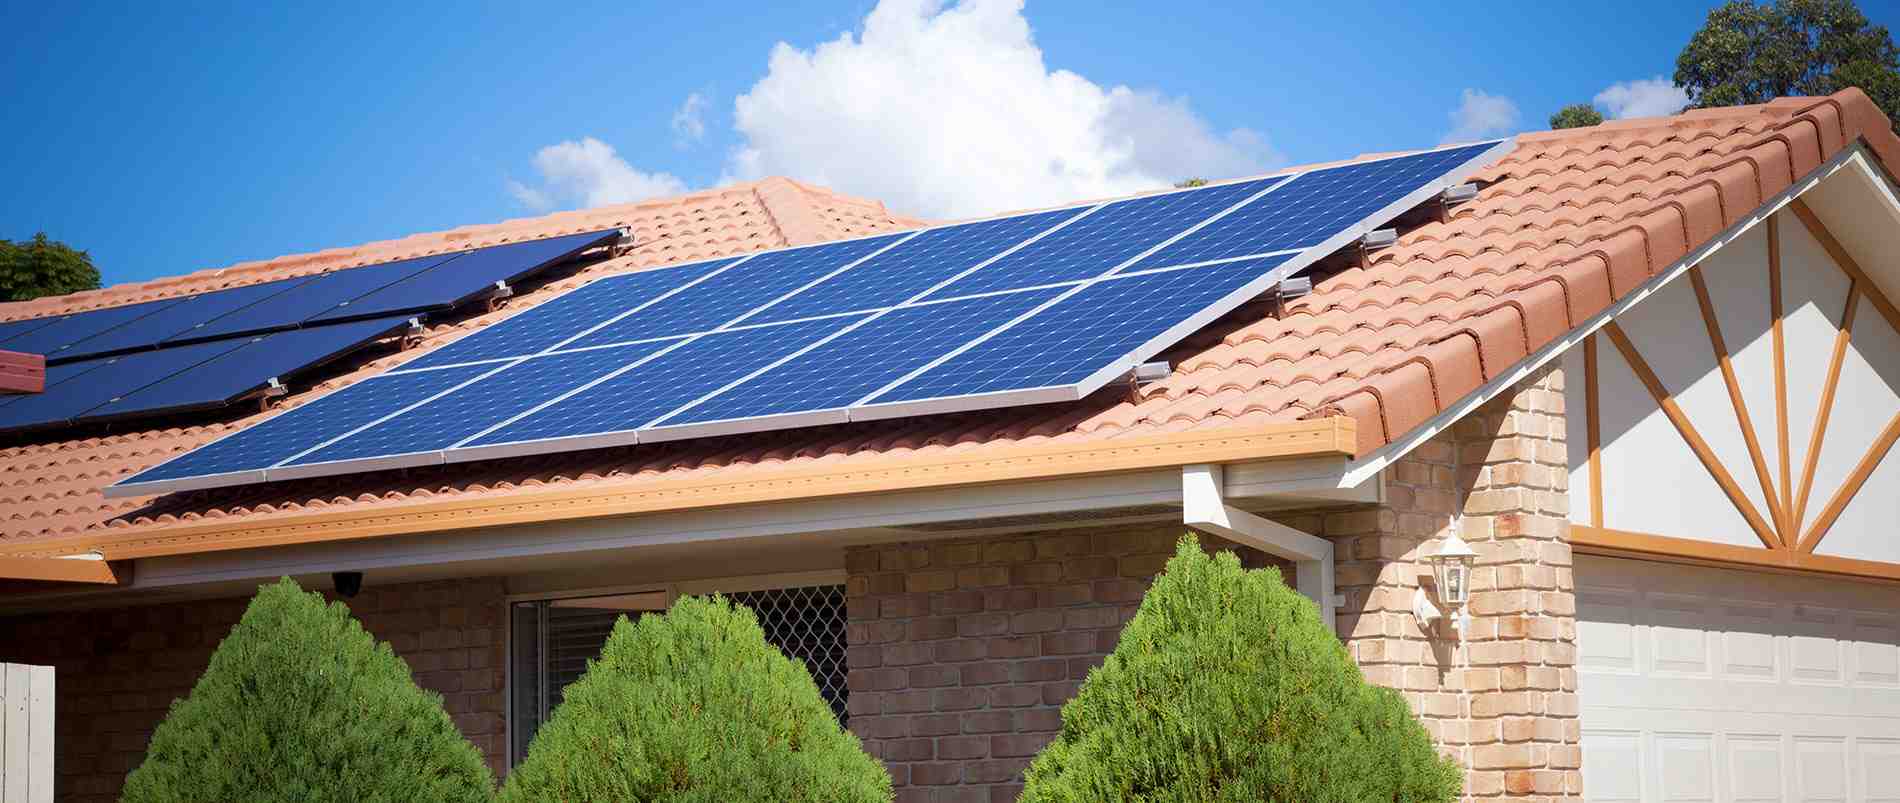 How much do solar panels cost for a 4000 square foot house?